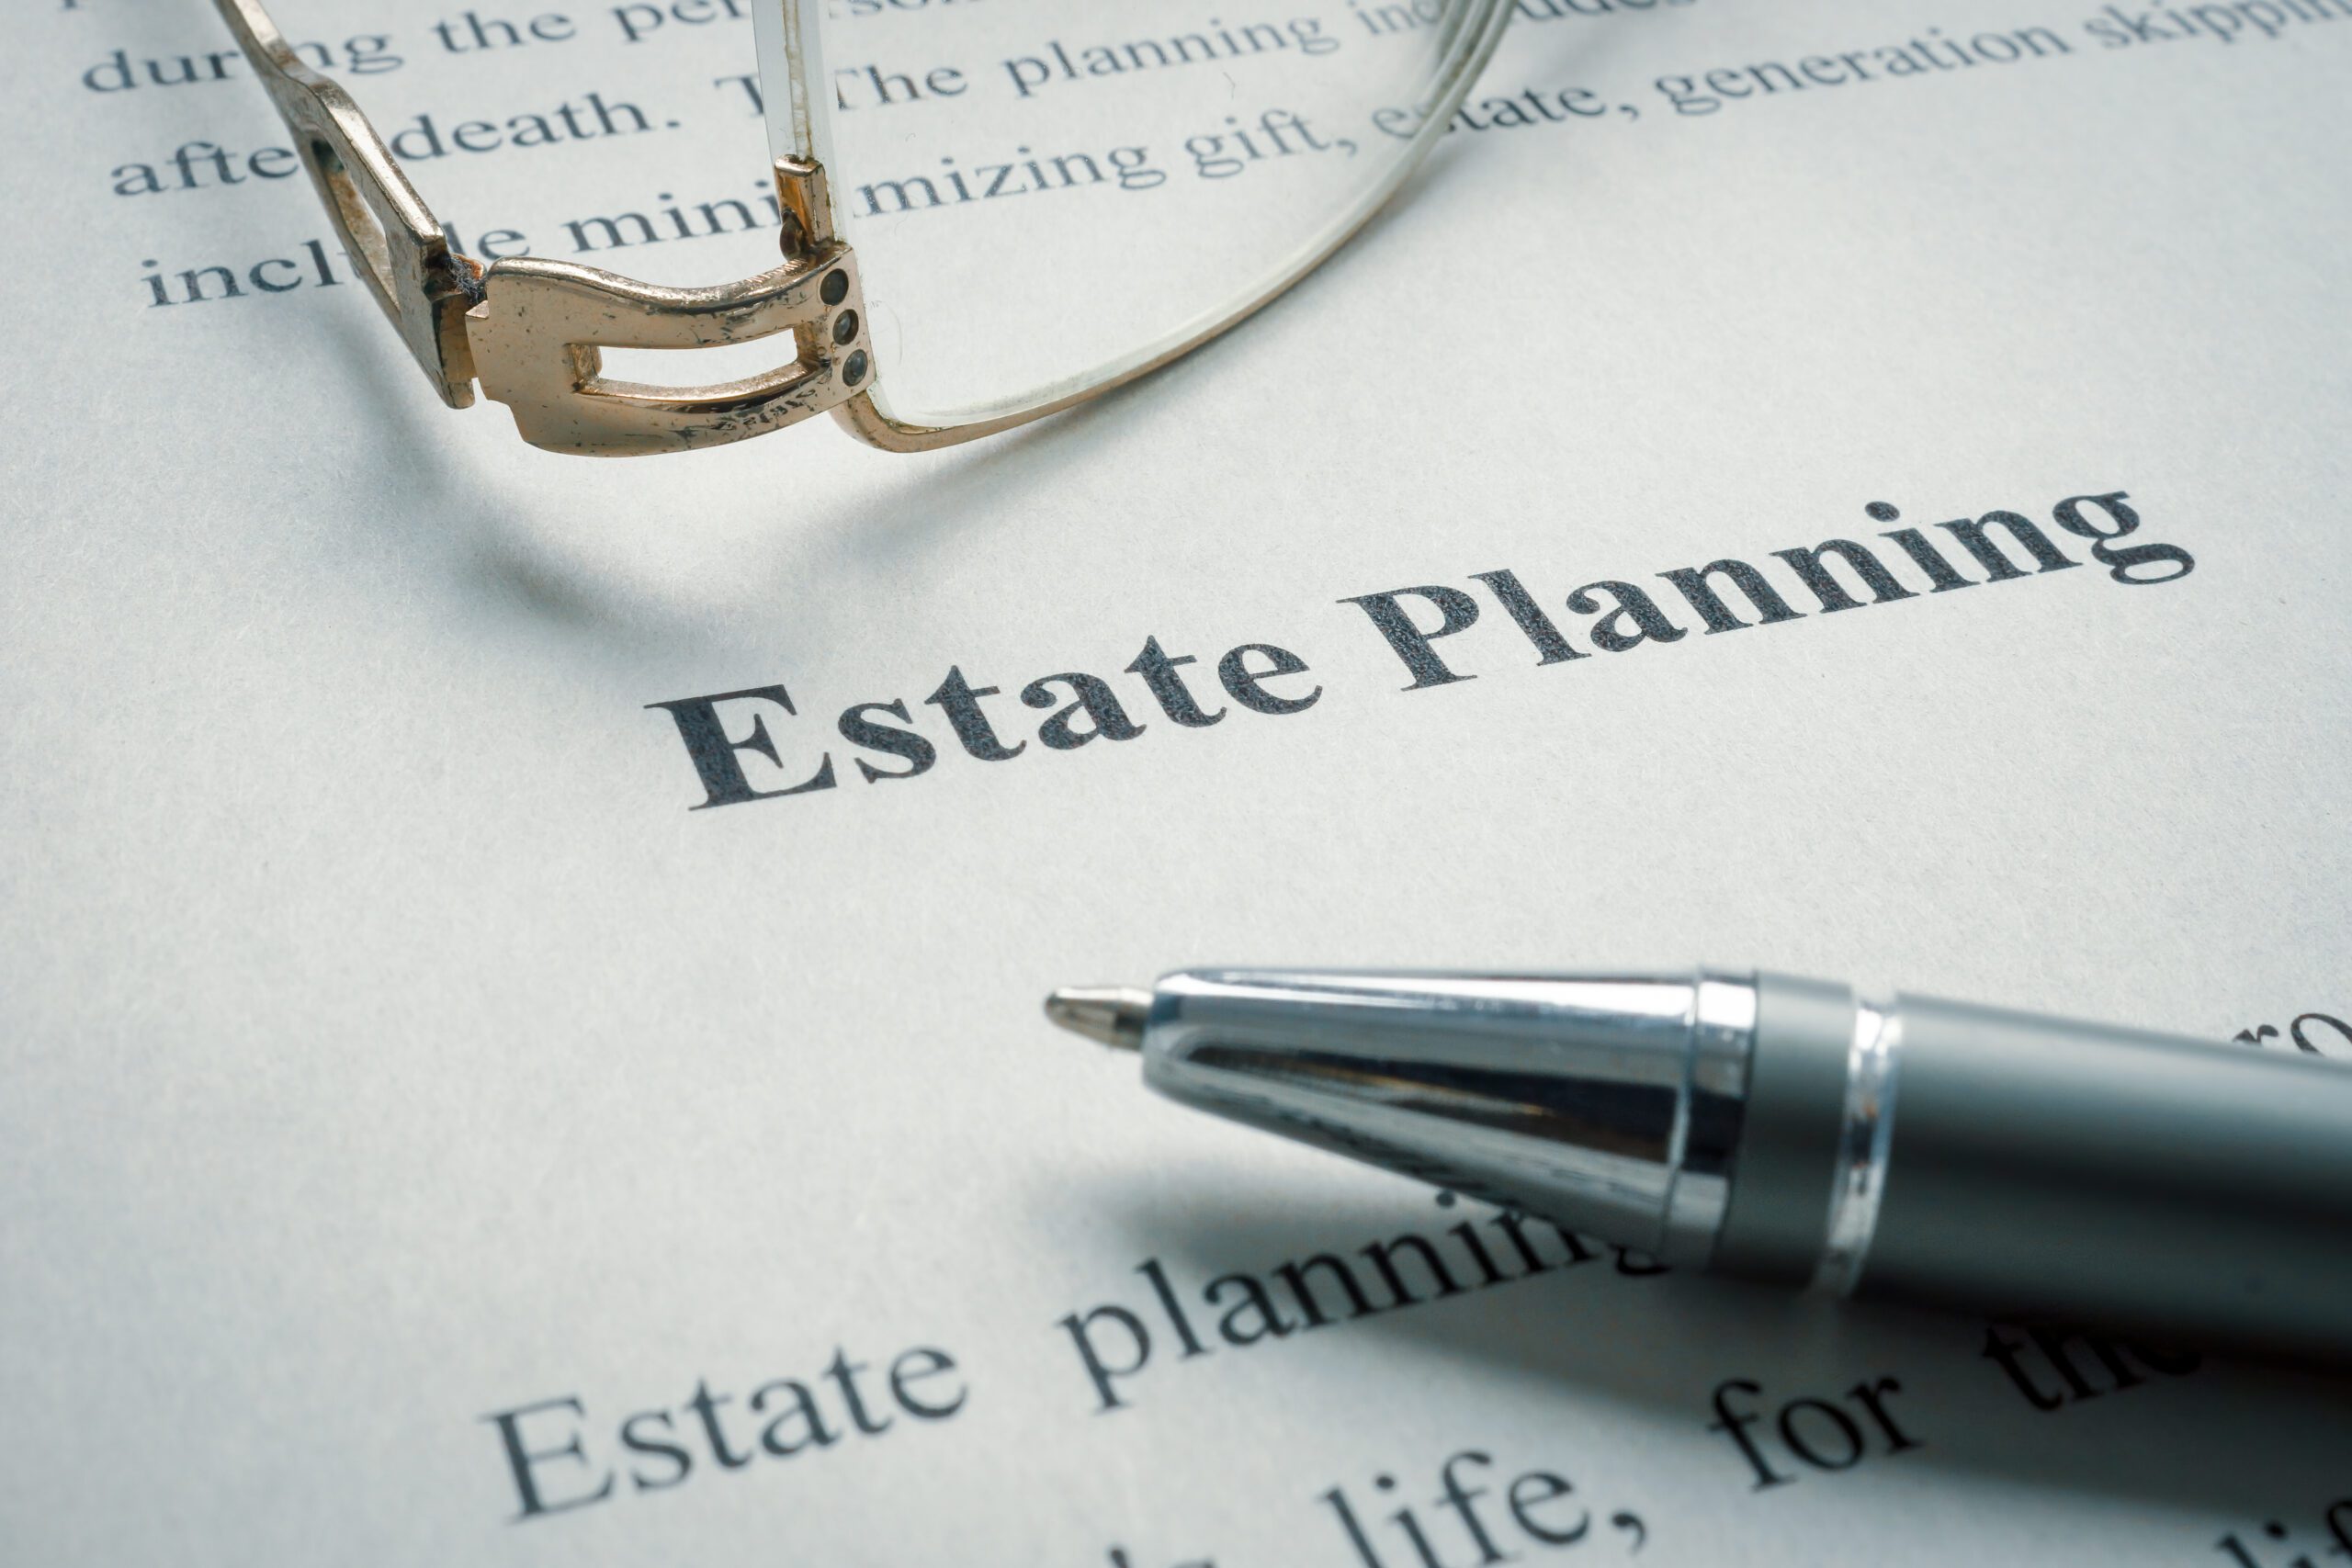 An image of a paper that says “estate planning” with glasses and a pen on top of the paper.